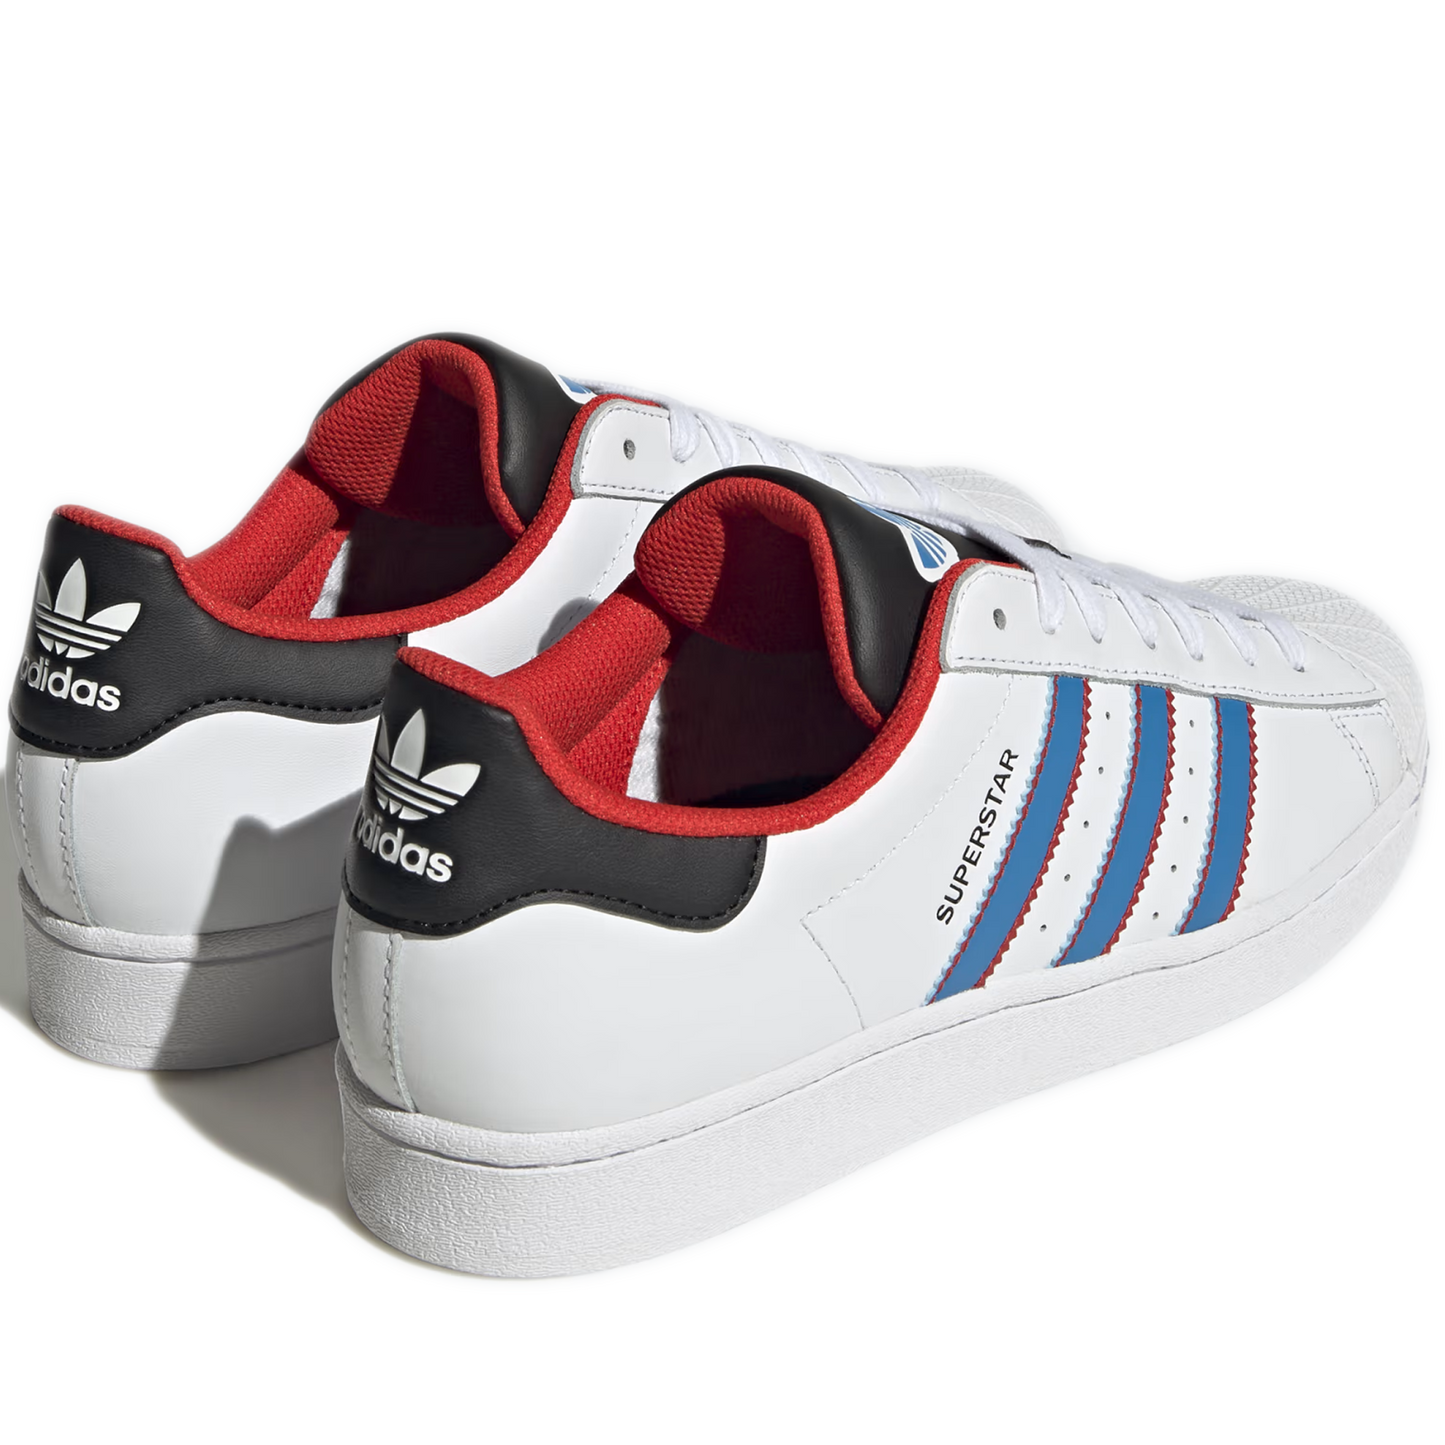 Men's Adidas Superstar Shoes - White/ Blue/ Red